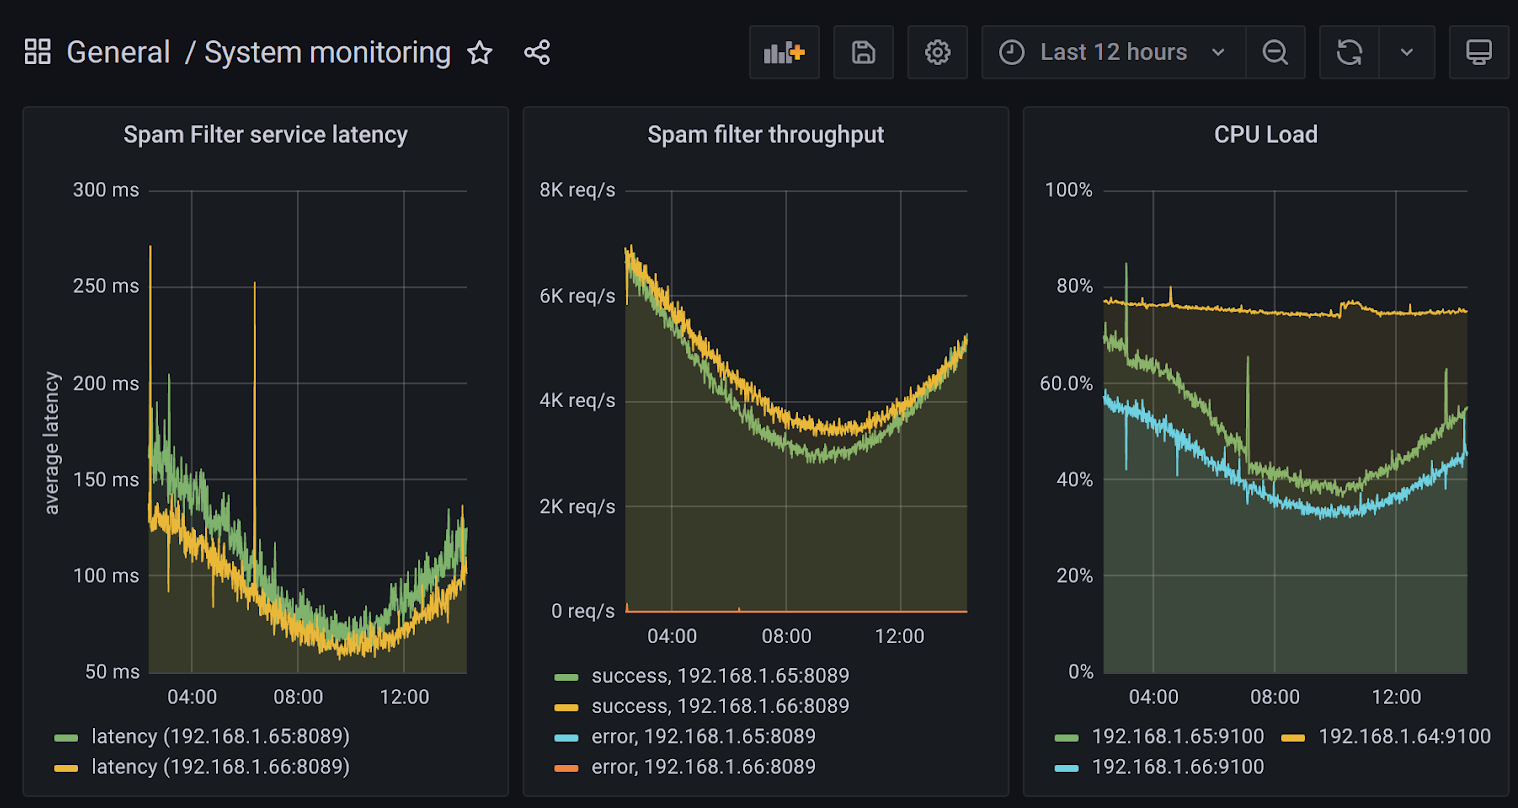 A screenshot of a website with three time series plots labeled Spam Filter service latency, Spam filter throughput, and CPU load. Each plot starts with a high value, lowers slowly and then rises again over a 6 hour period.